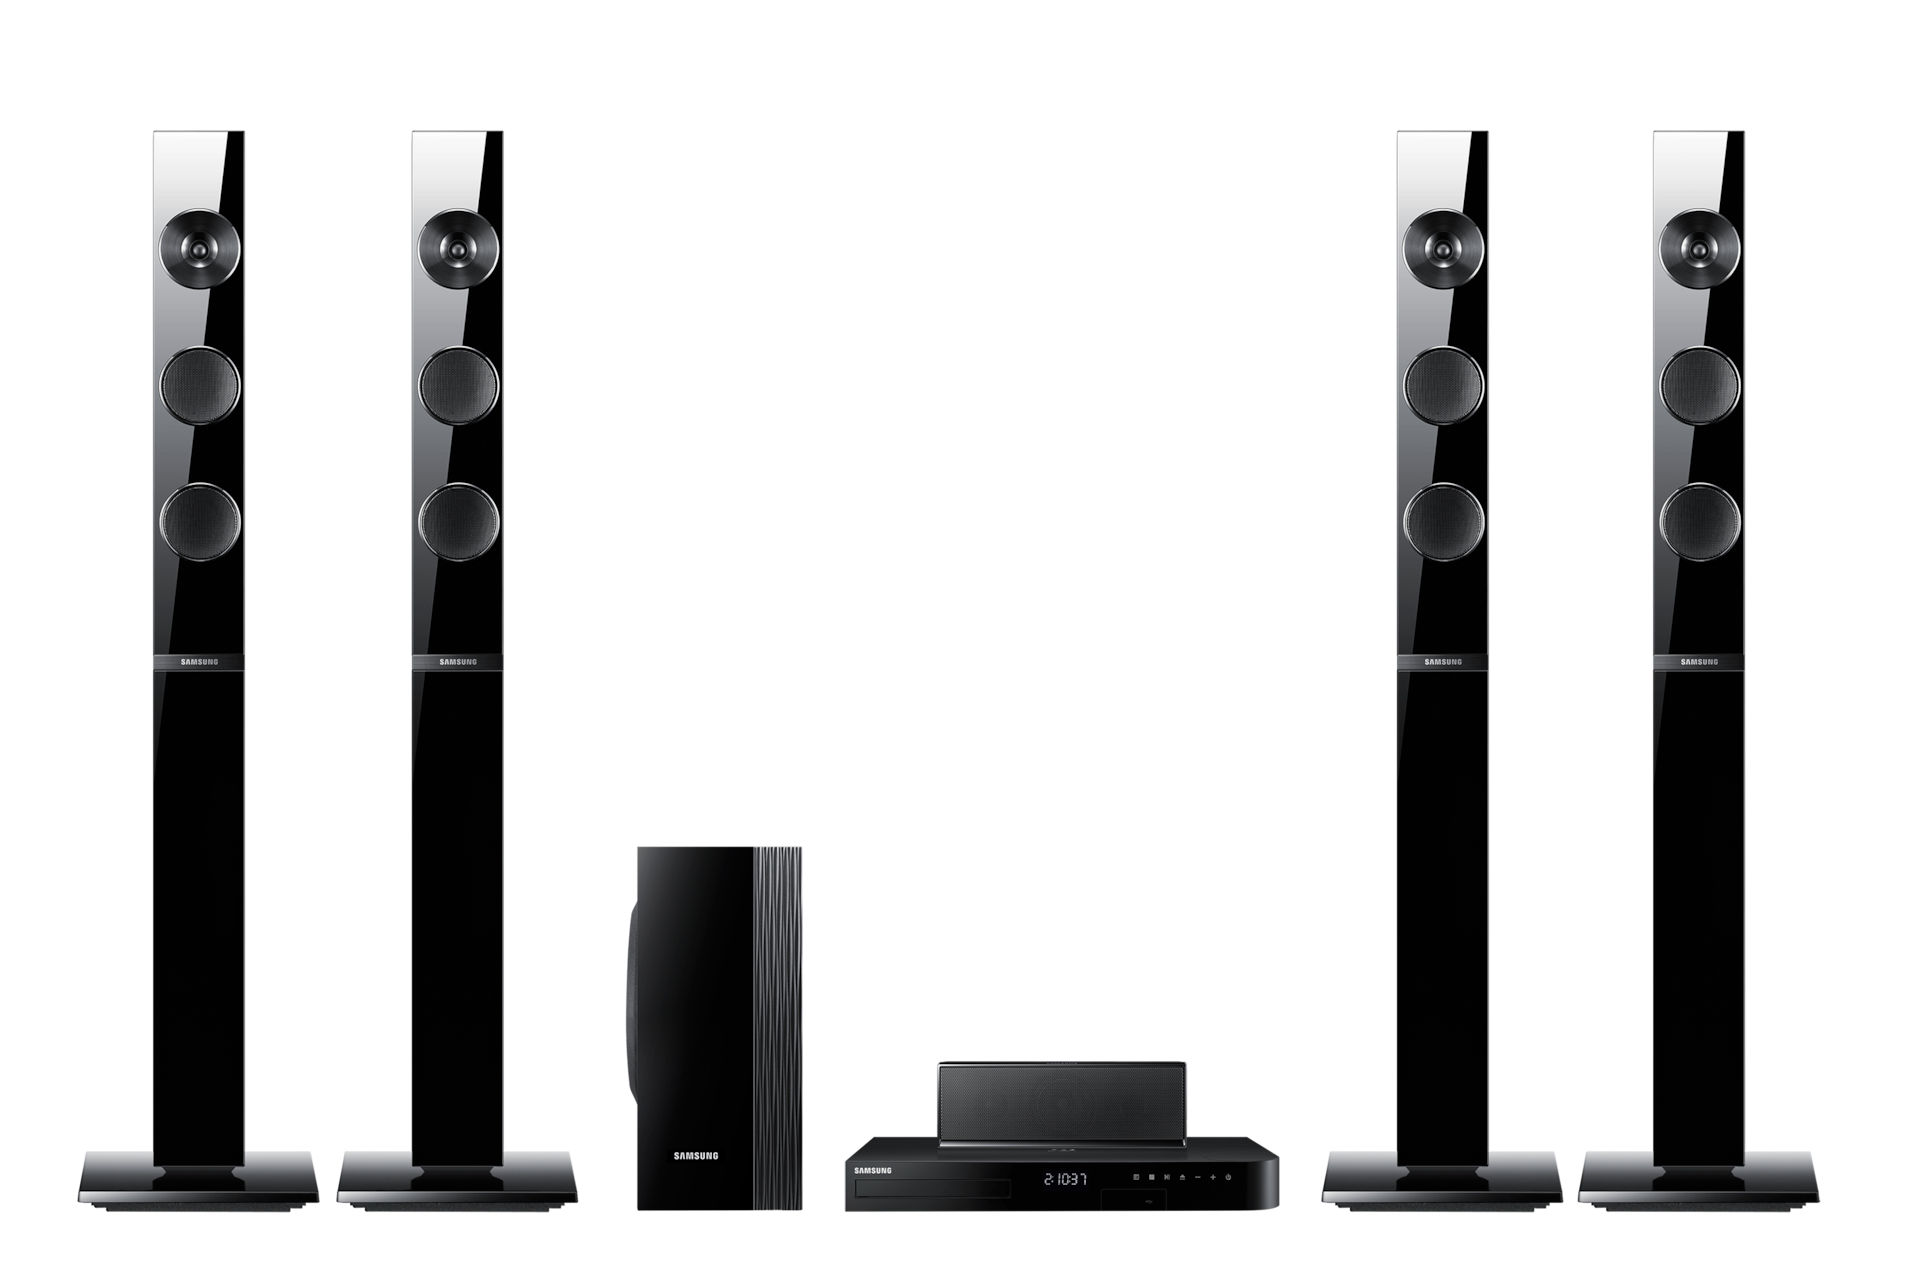 Top Picasso Informeer Home Theater System 5.1 CH - Buy | Samsung KSA